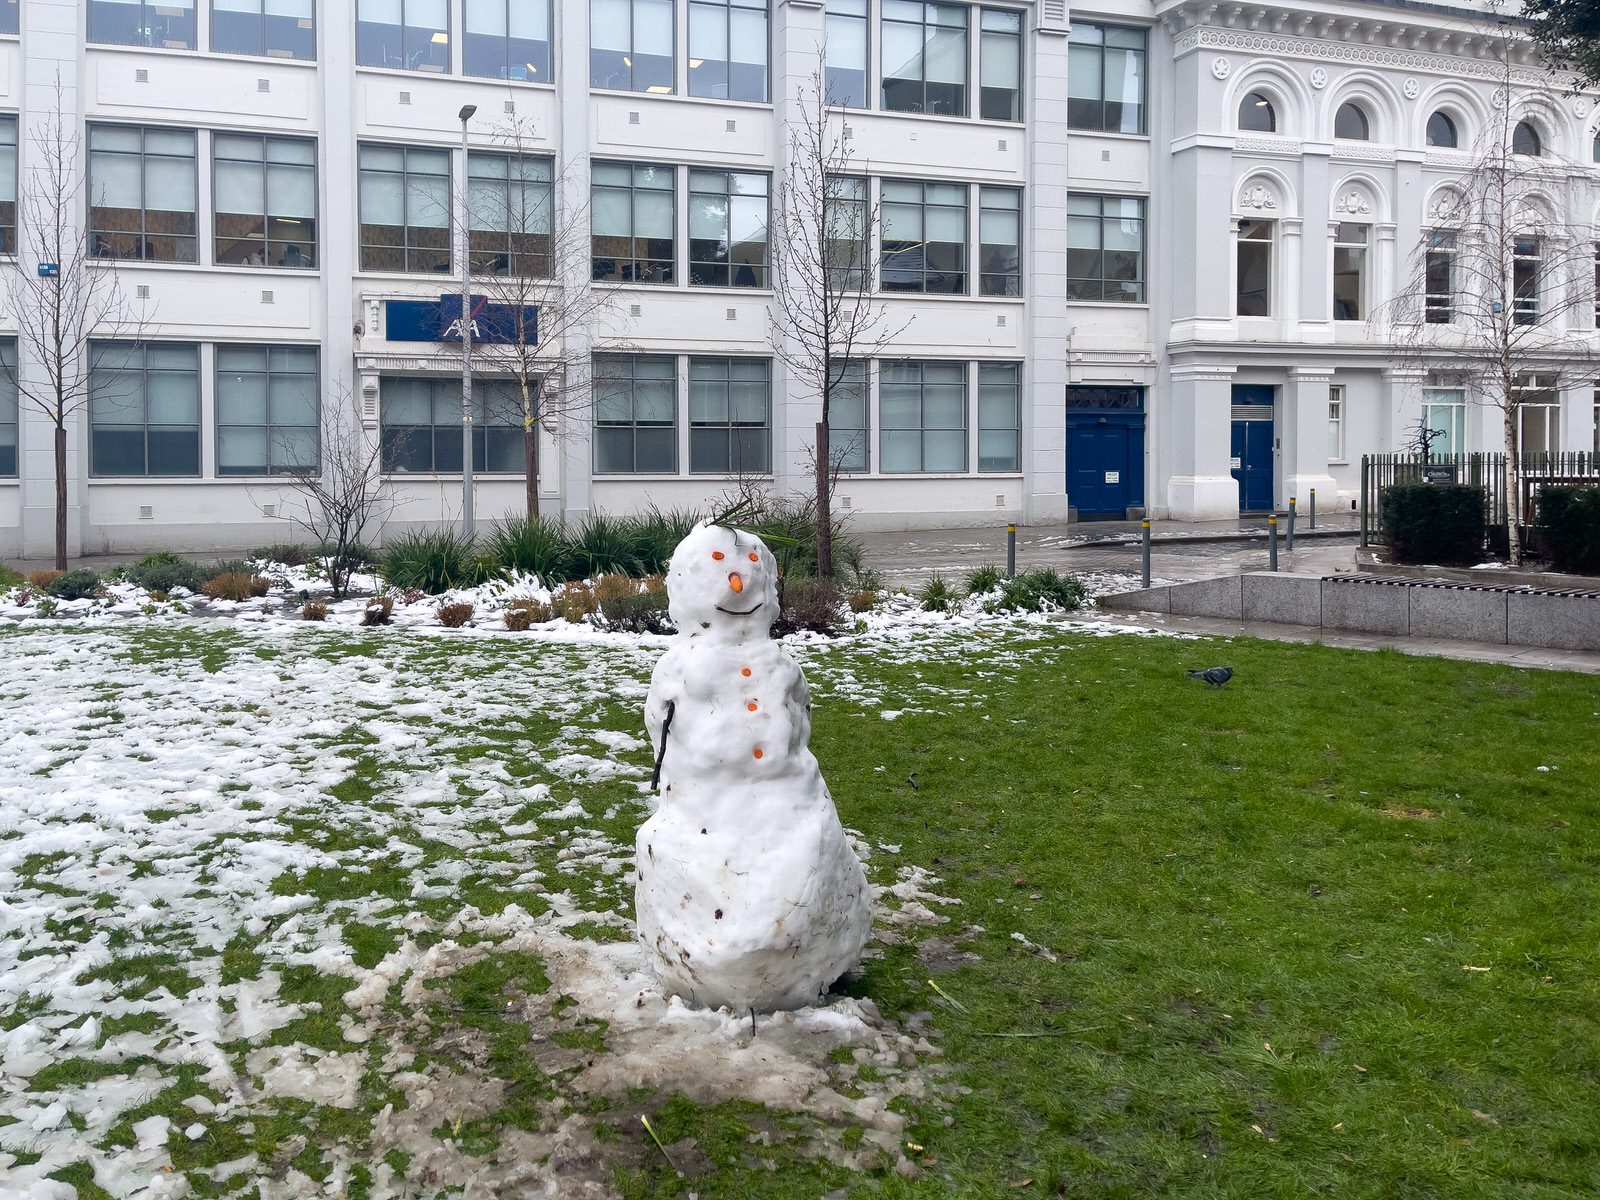 A WELL DRESSED BUT LONELY SNOWMAN [WOLFE TONE PARK IN DUBLIN]-228984-1